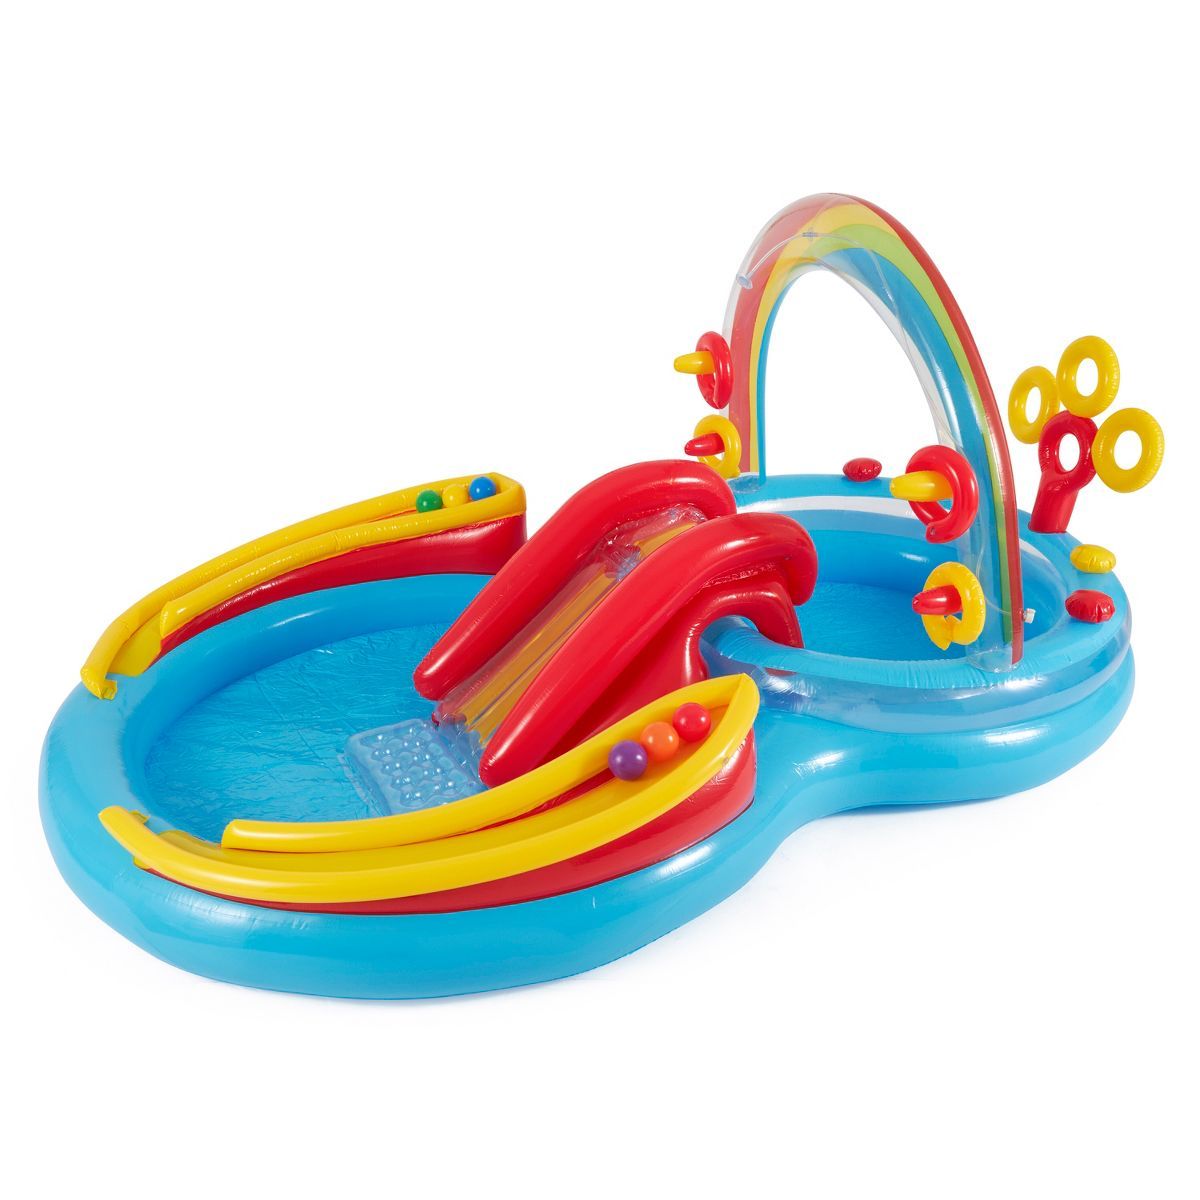 Intex Rainbow Slide Inflatable Pool and Water Slide Ring Center | Target